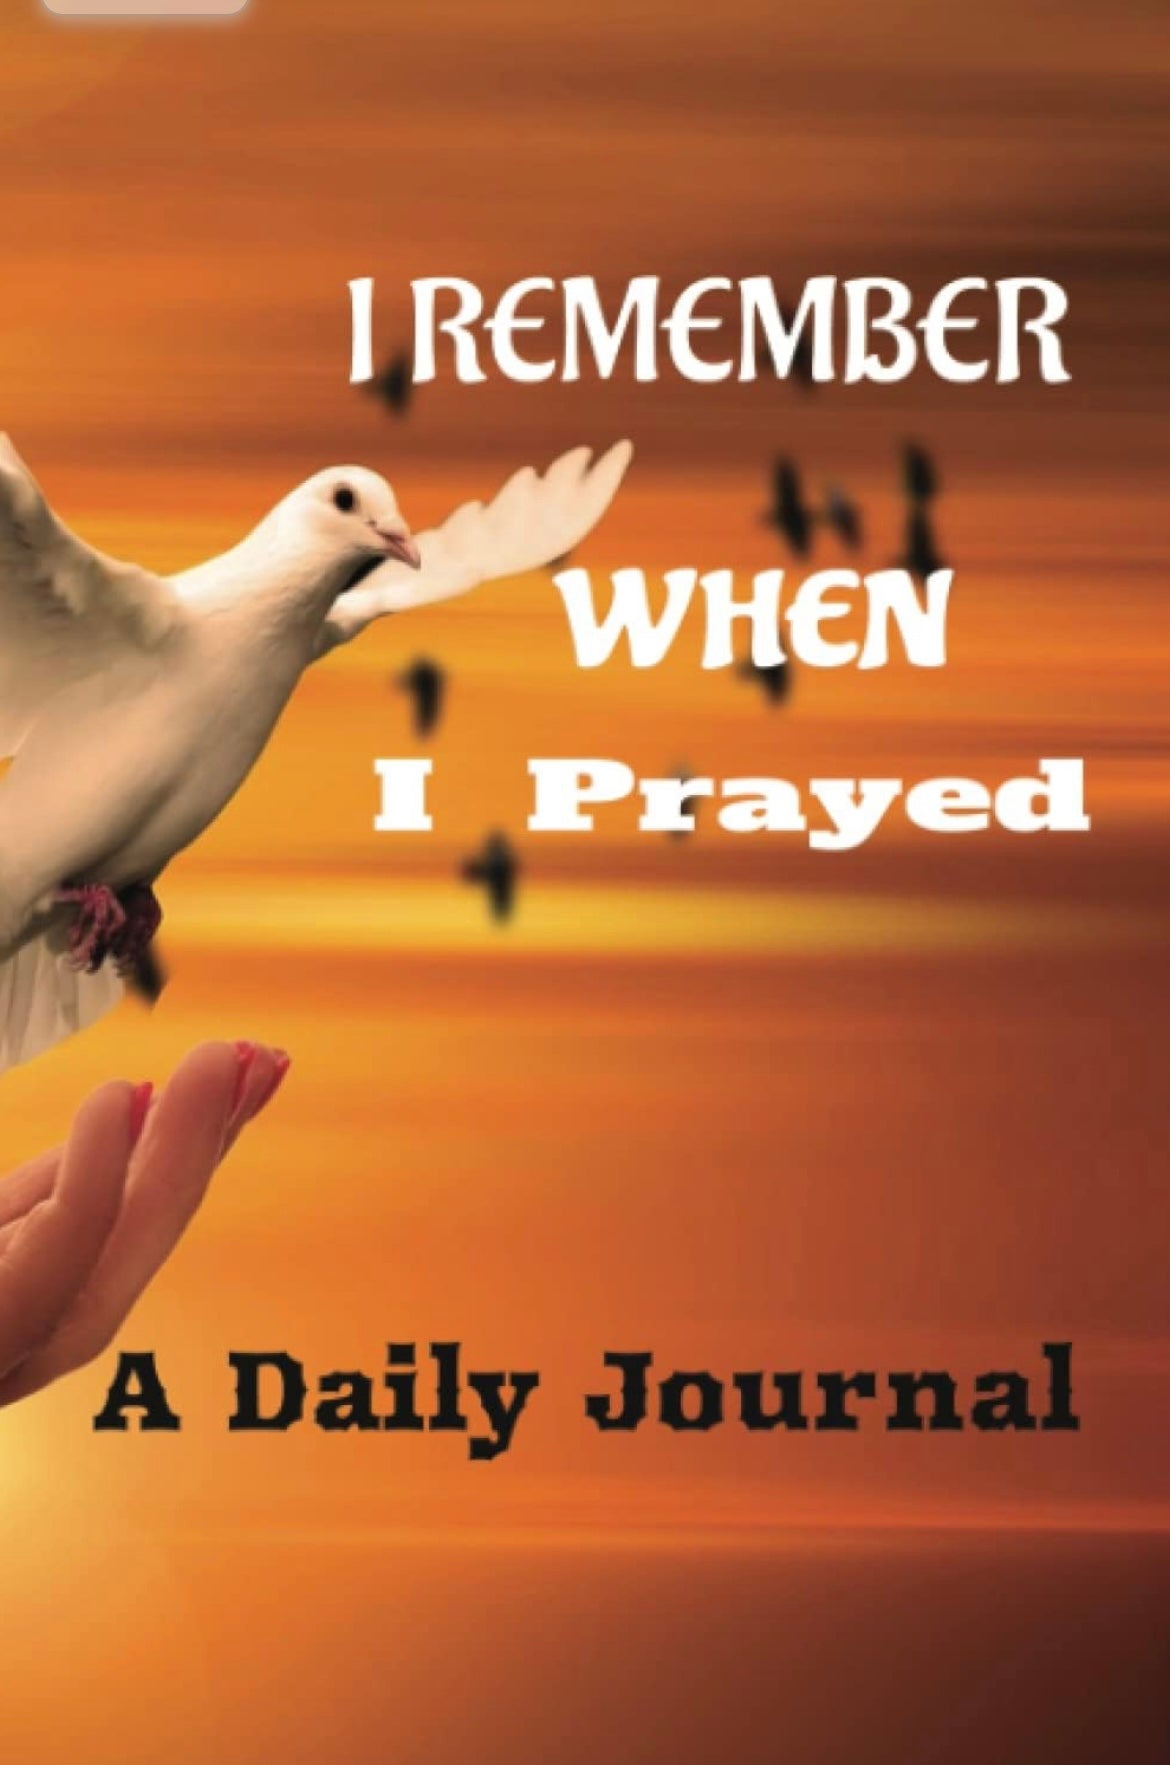 I Remember When I Prayed - A Daily Journal (6x9 inch 200 Pages)